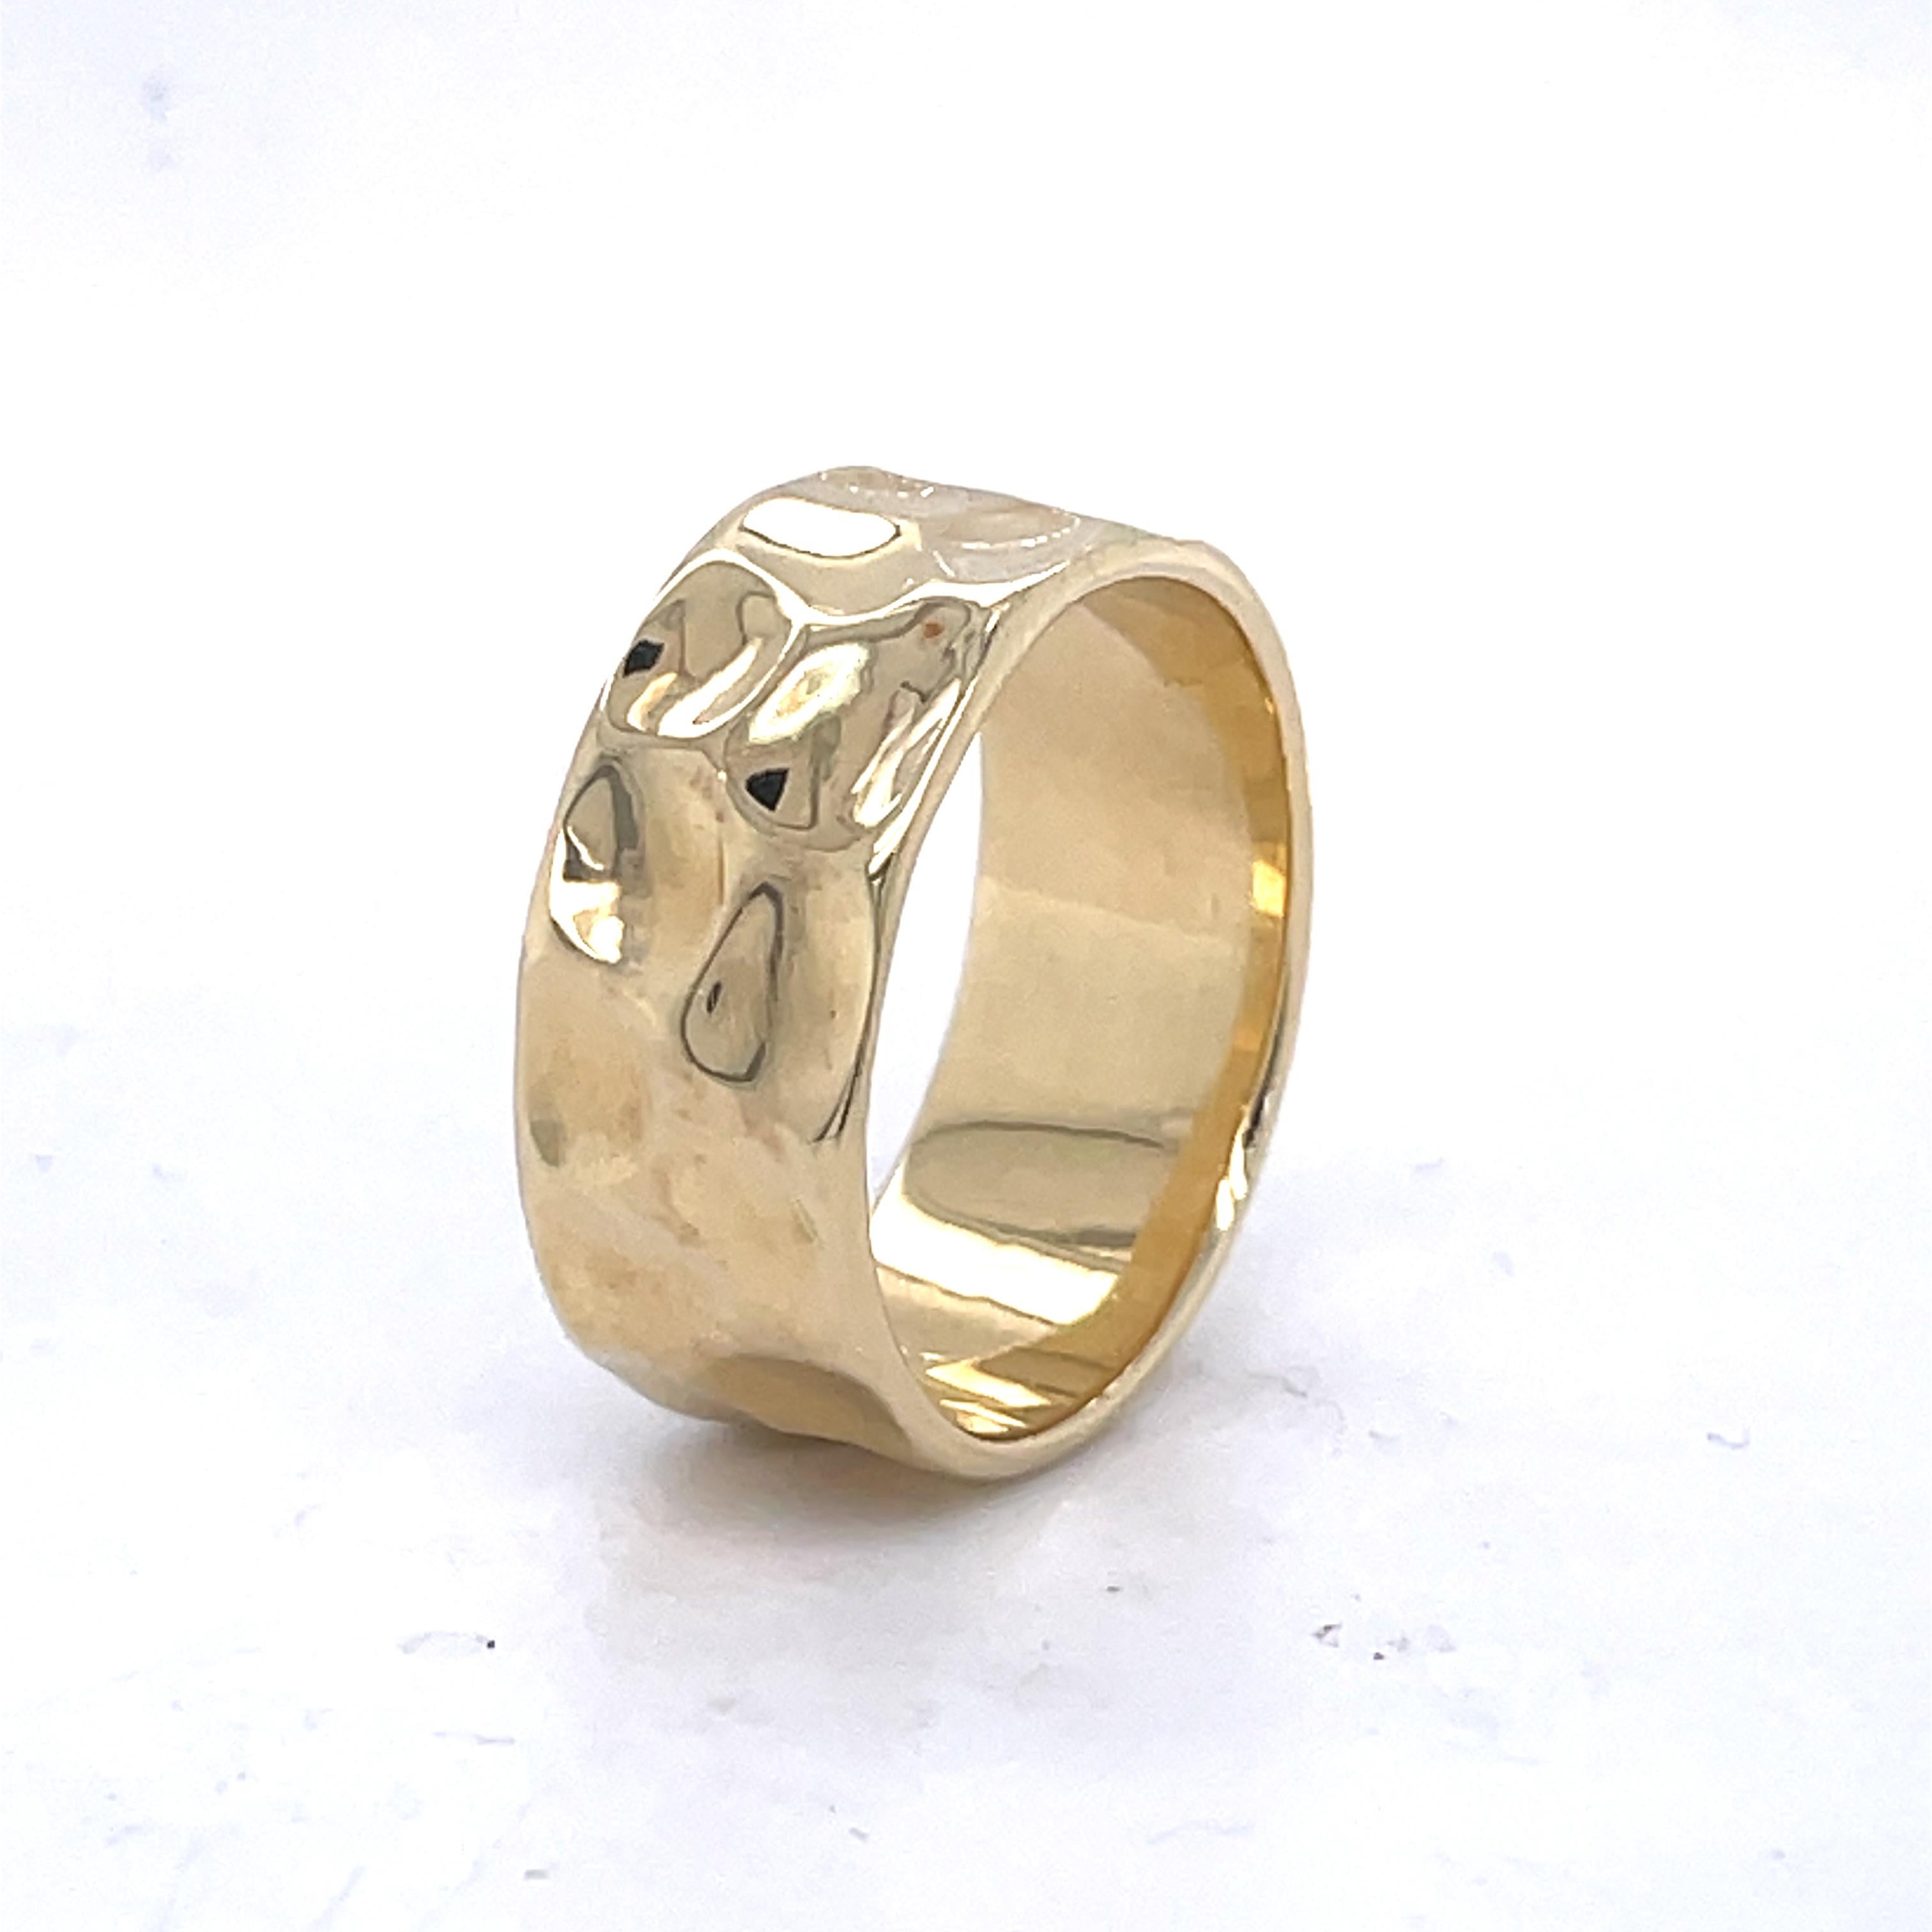 Jewelry Material: Yellow Gold 14k (the gold has been tested by a professional)
Total Metal Weight: 7.2g
Size: 9 US

Feel free to contact us for inquiries and consultation and special requests.
The item will be shipped in a luxury box and bag (ready